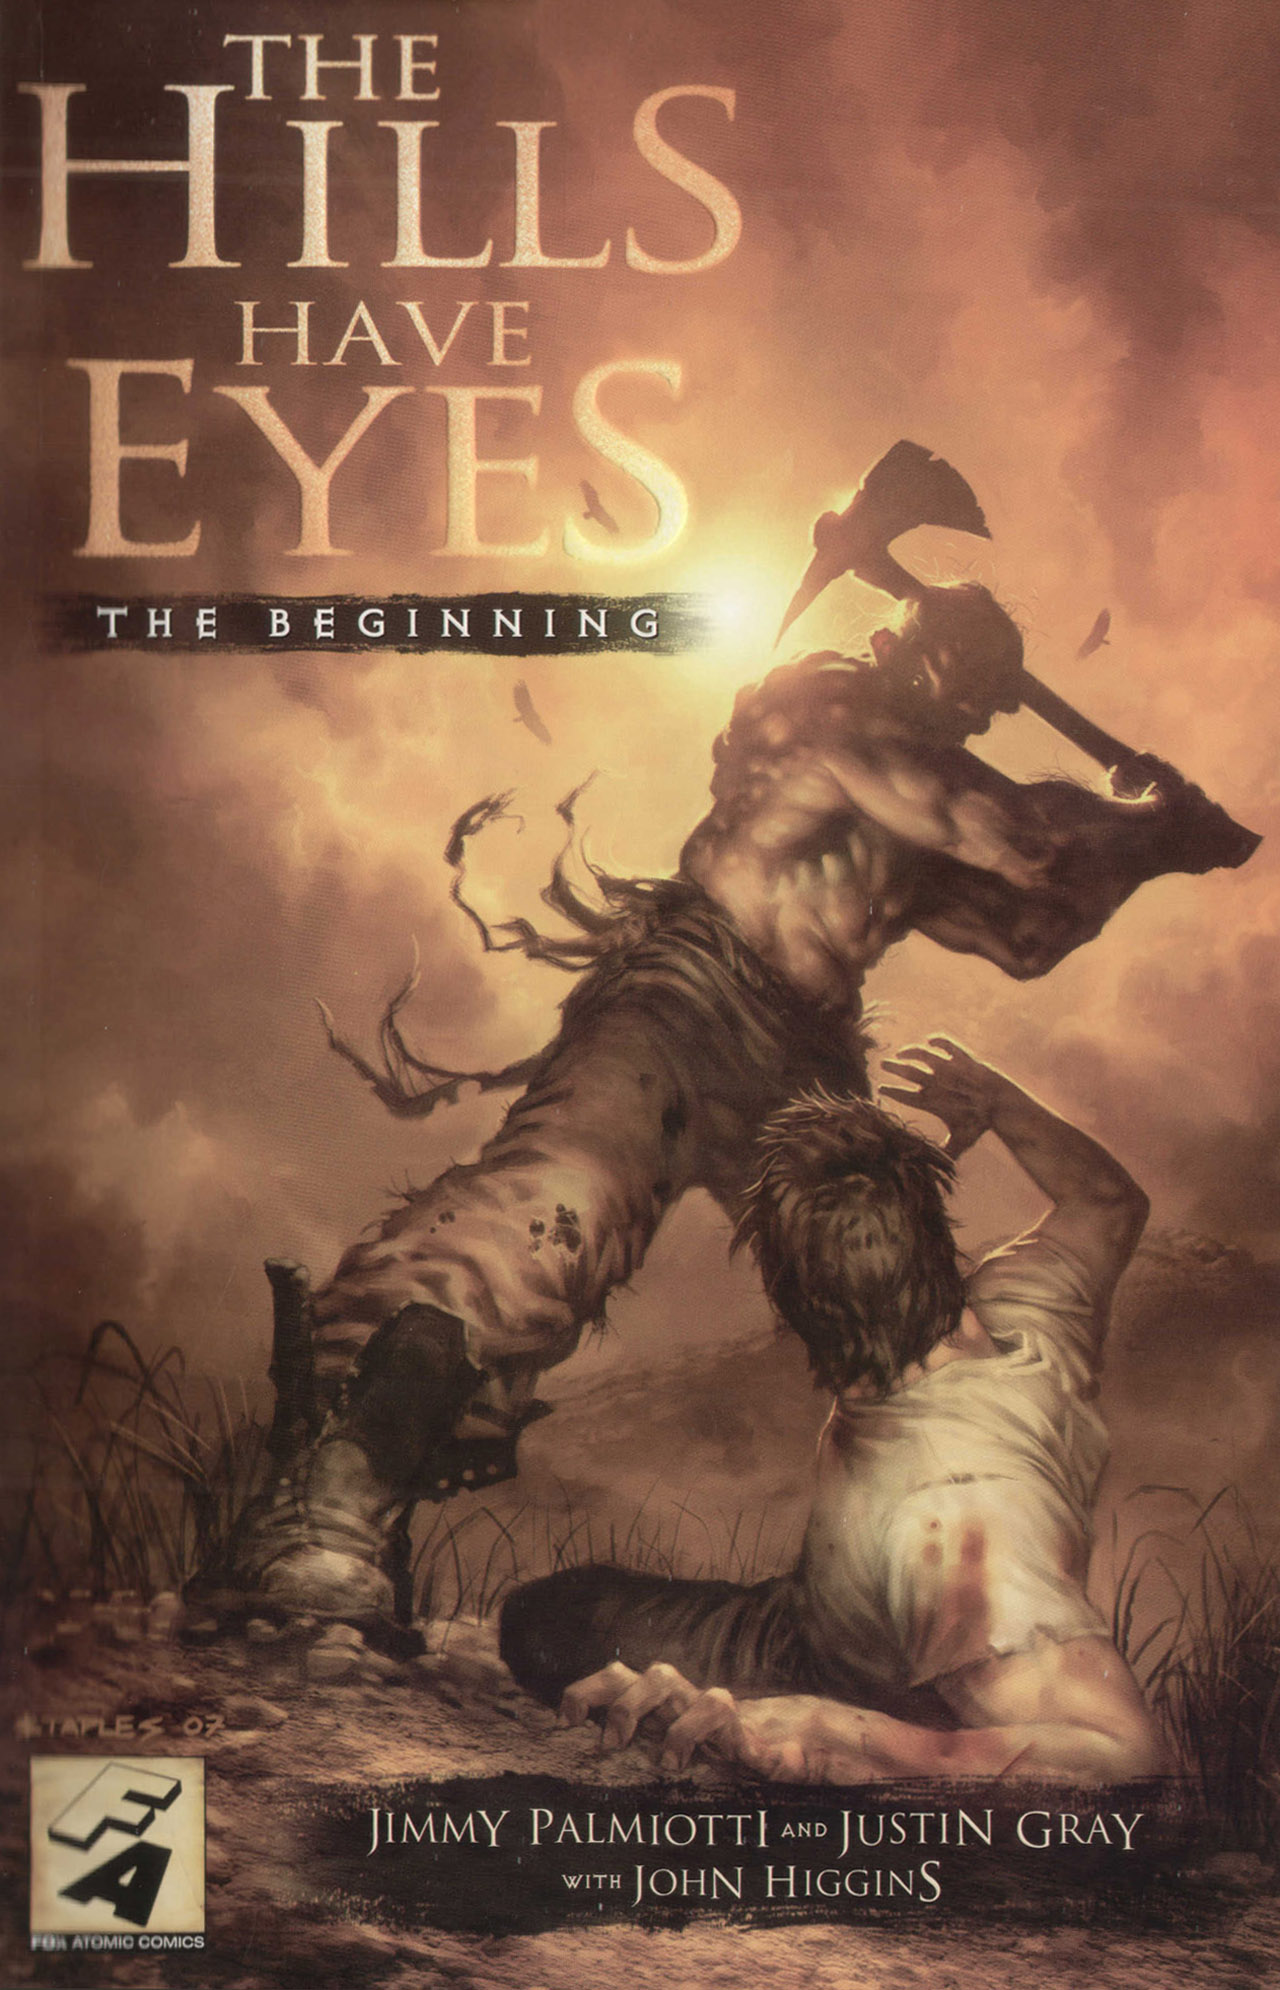 Read online The Hills Have Eyes: The Beginning comic -  Issue # TPB - 1